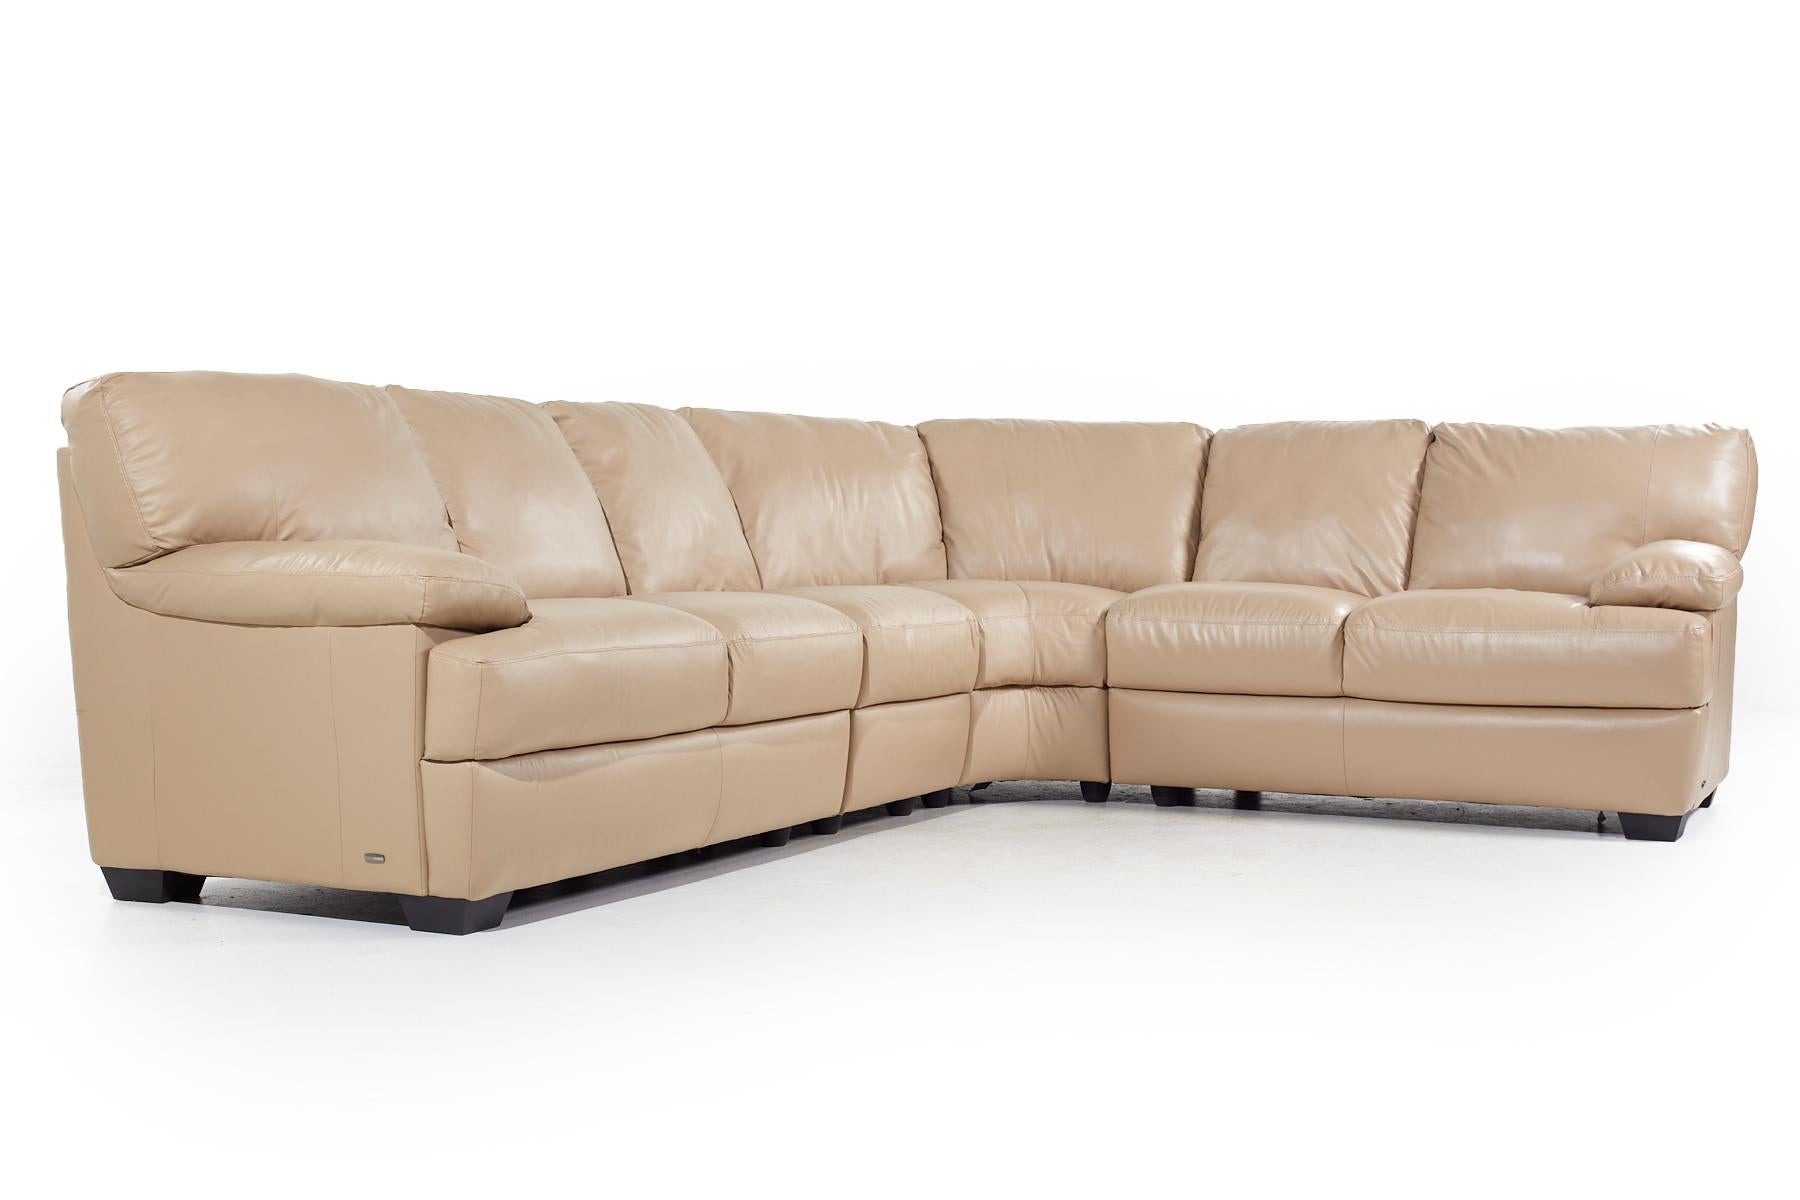 Natuzzi Leather Sectional Sofa

This sofa measures: 120 wide x 95 deep x 37 inches high, with a seat height of 21 and arm height of 25 inches

We take our photos in a controlled lighting studio to show as much detail as possible. We do not Photoshop